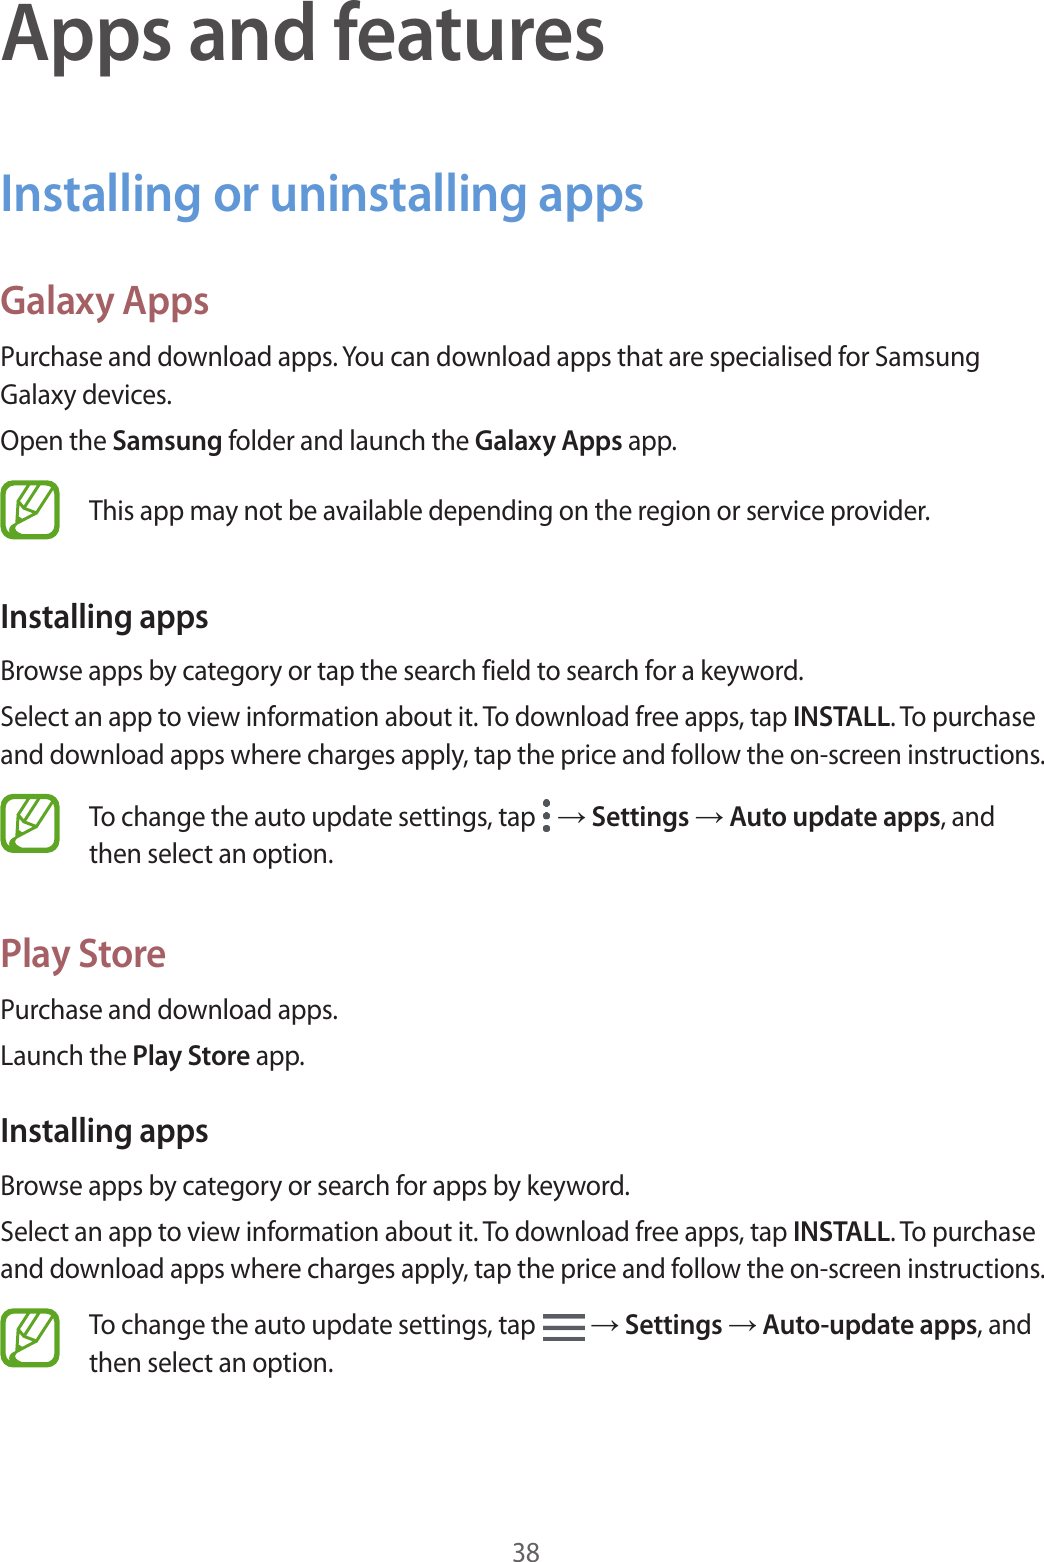 38Apps and featuresInstalling or uninstalling appsGalaxy AppsPurchase and download apps. You can download apps that are specialised for Samsung Galaxy devices.Open the Samsung folder and launch the Galaxy Apps app.This app may not be available depending on the region or service provider.Installing appsBrowse apps by category or tap the search field to search for a keyword.Select an app to view information about it. To download free apps, tap INSTALL. To purchase and download apps where charges apply, tap the price and follow the on-screen instructions.To change the auto update settings, tap   → Settings → Auto update apps, and then select an option.Play StorePurchase and download apps.Launch the Play Store app.Installing appsBrowse apps by category or search for apps by keyword.Select an app to view information about it. To download free apps, tap INSTALL. To purchase and download apps where charges apply, tap the price and follow the on-screen instructions.To change the auto update settings, tap   → Settings → Auto-update apps, and then select an option.